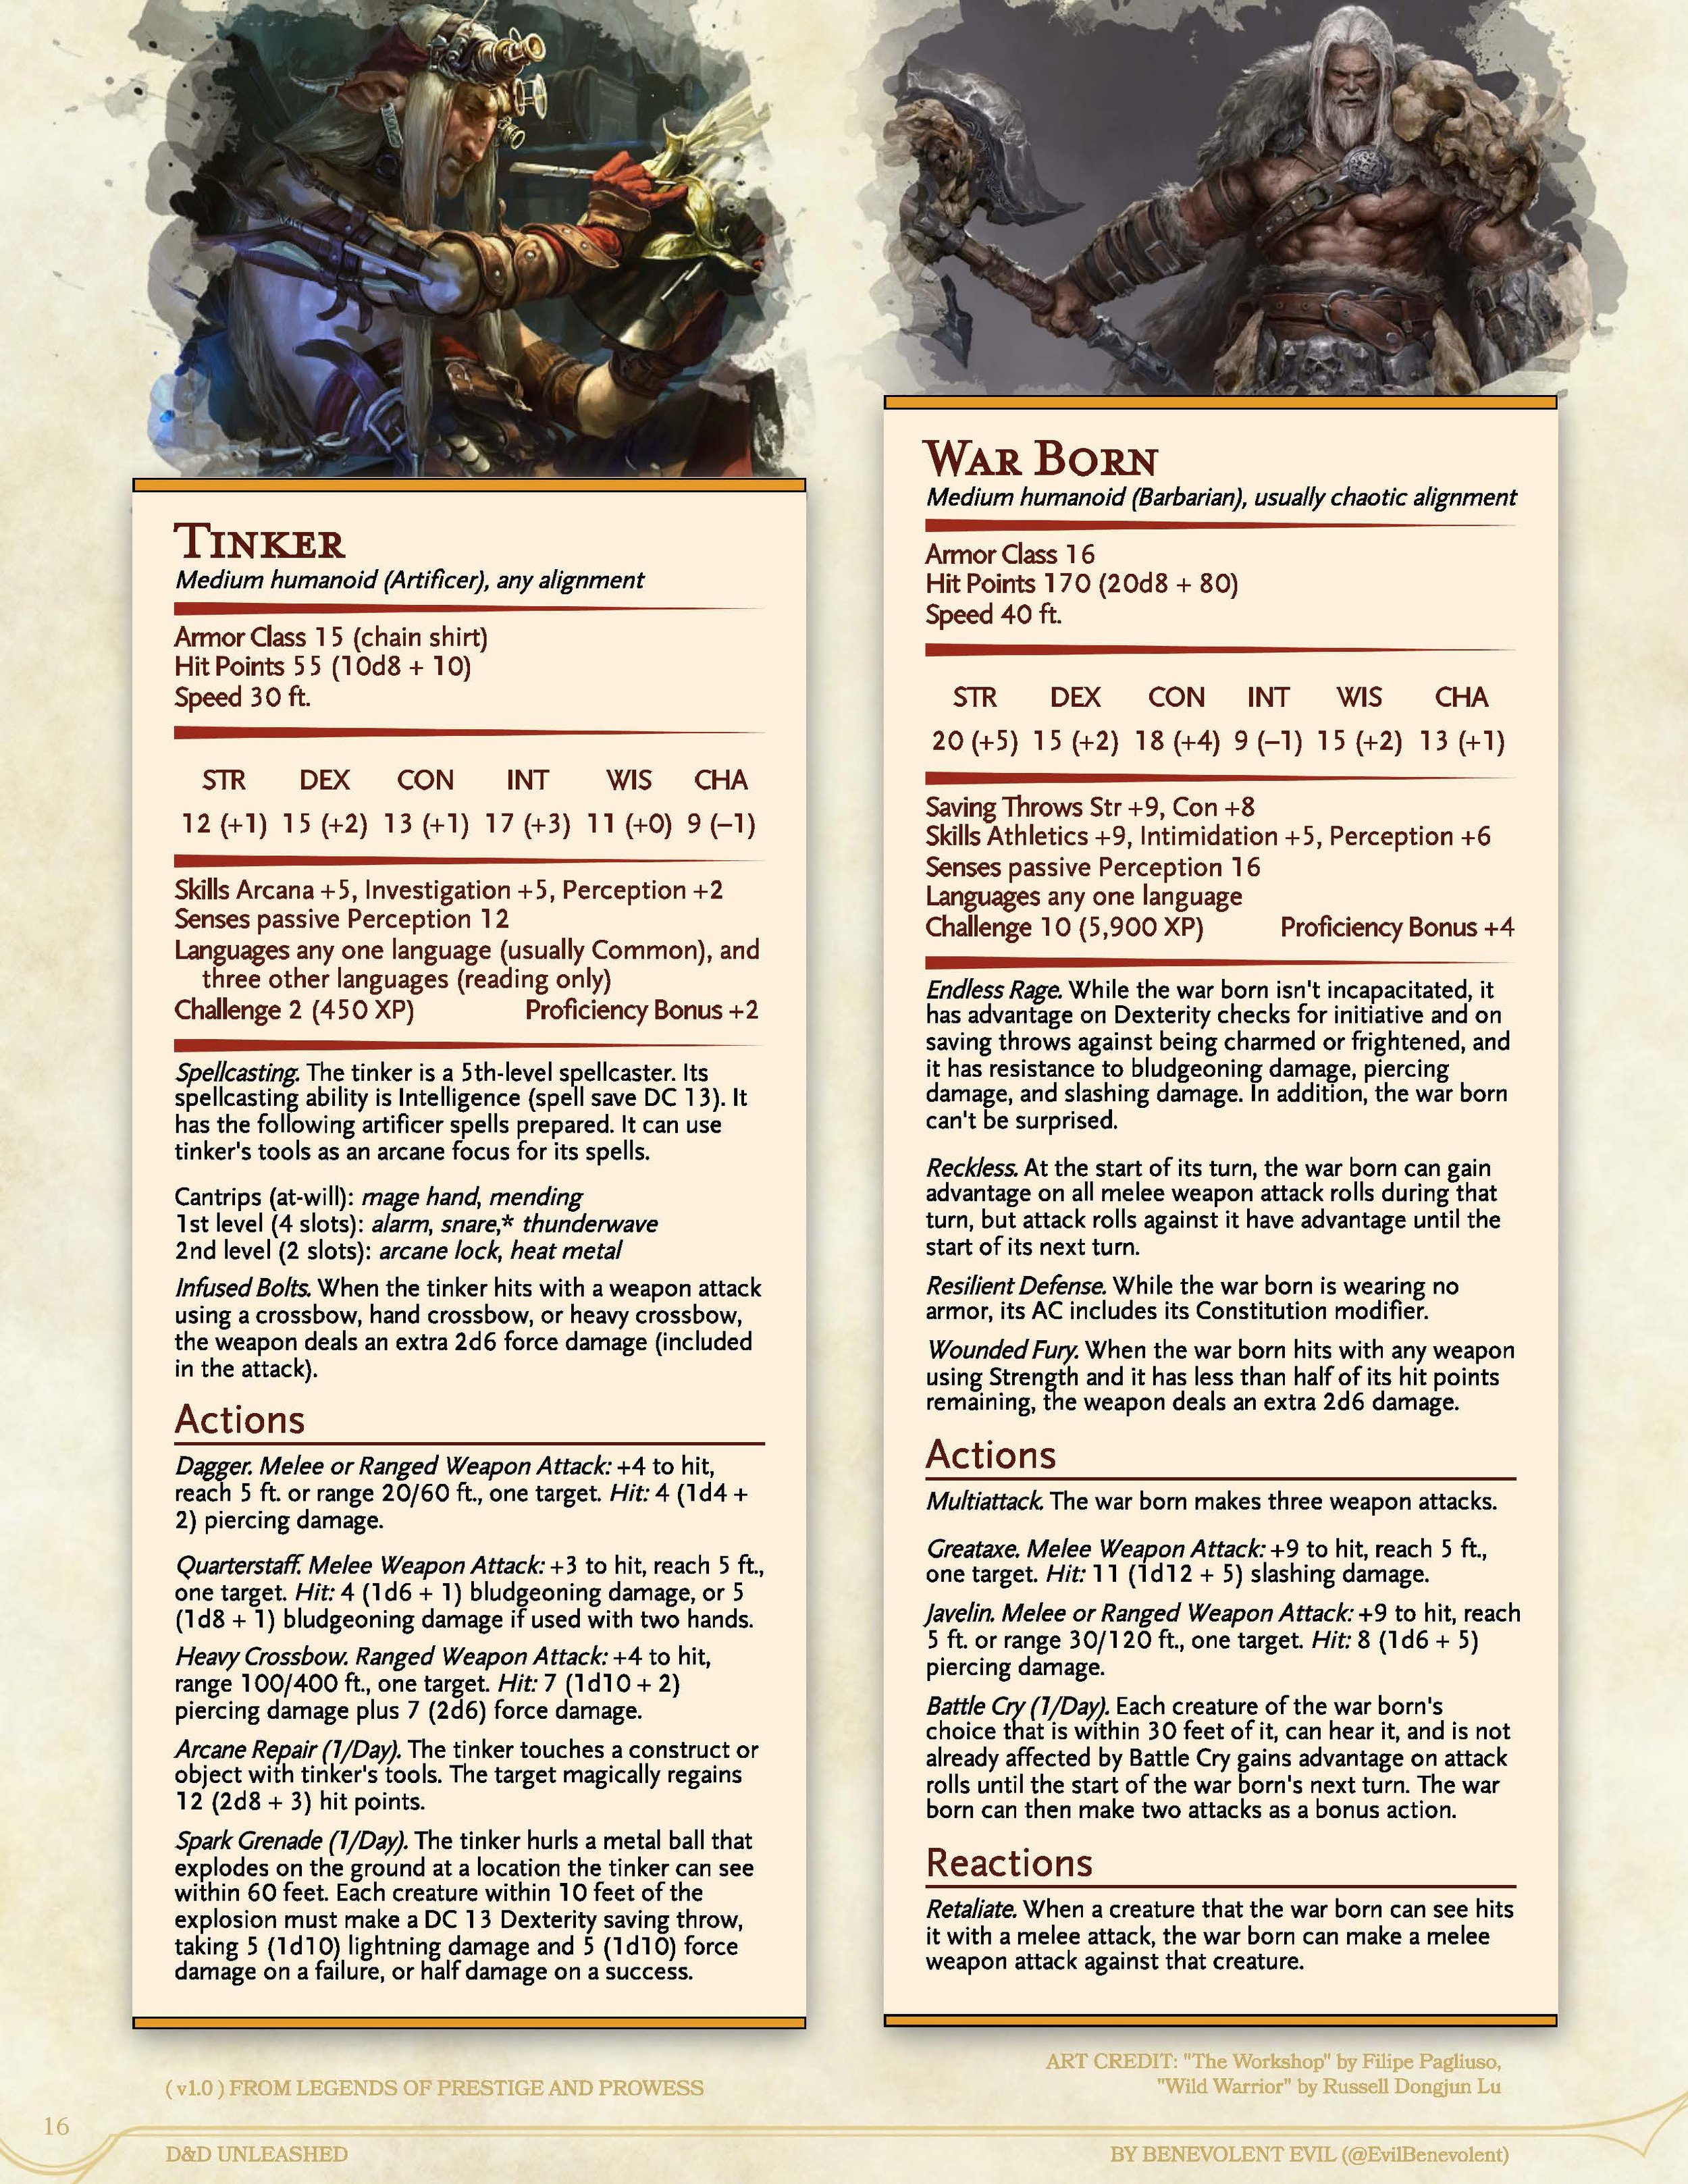 D&D Unleashed - Assorted Humanoid NPCs (v1_0)_Page_16.jpg